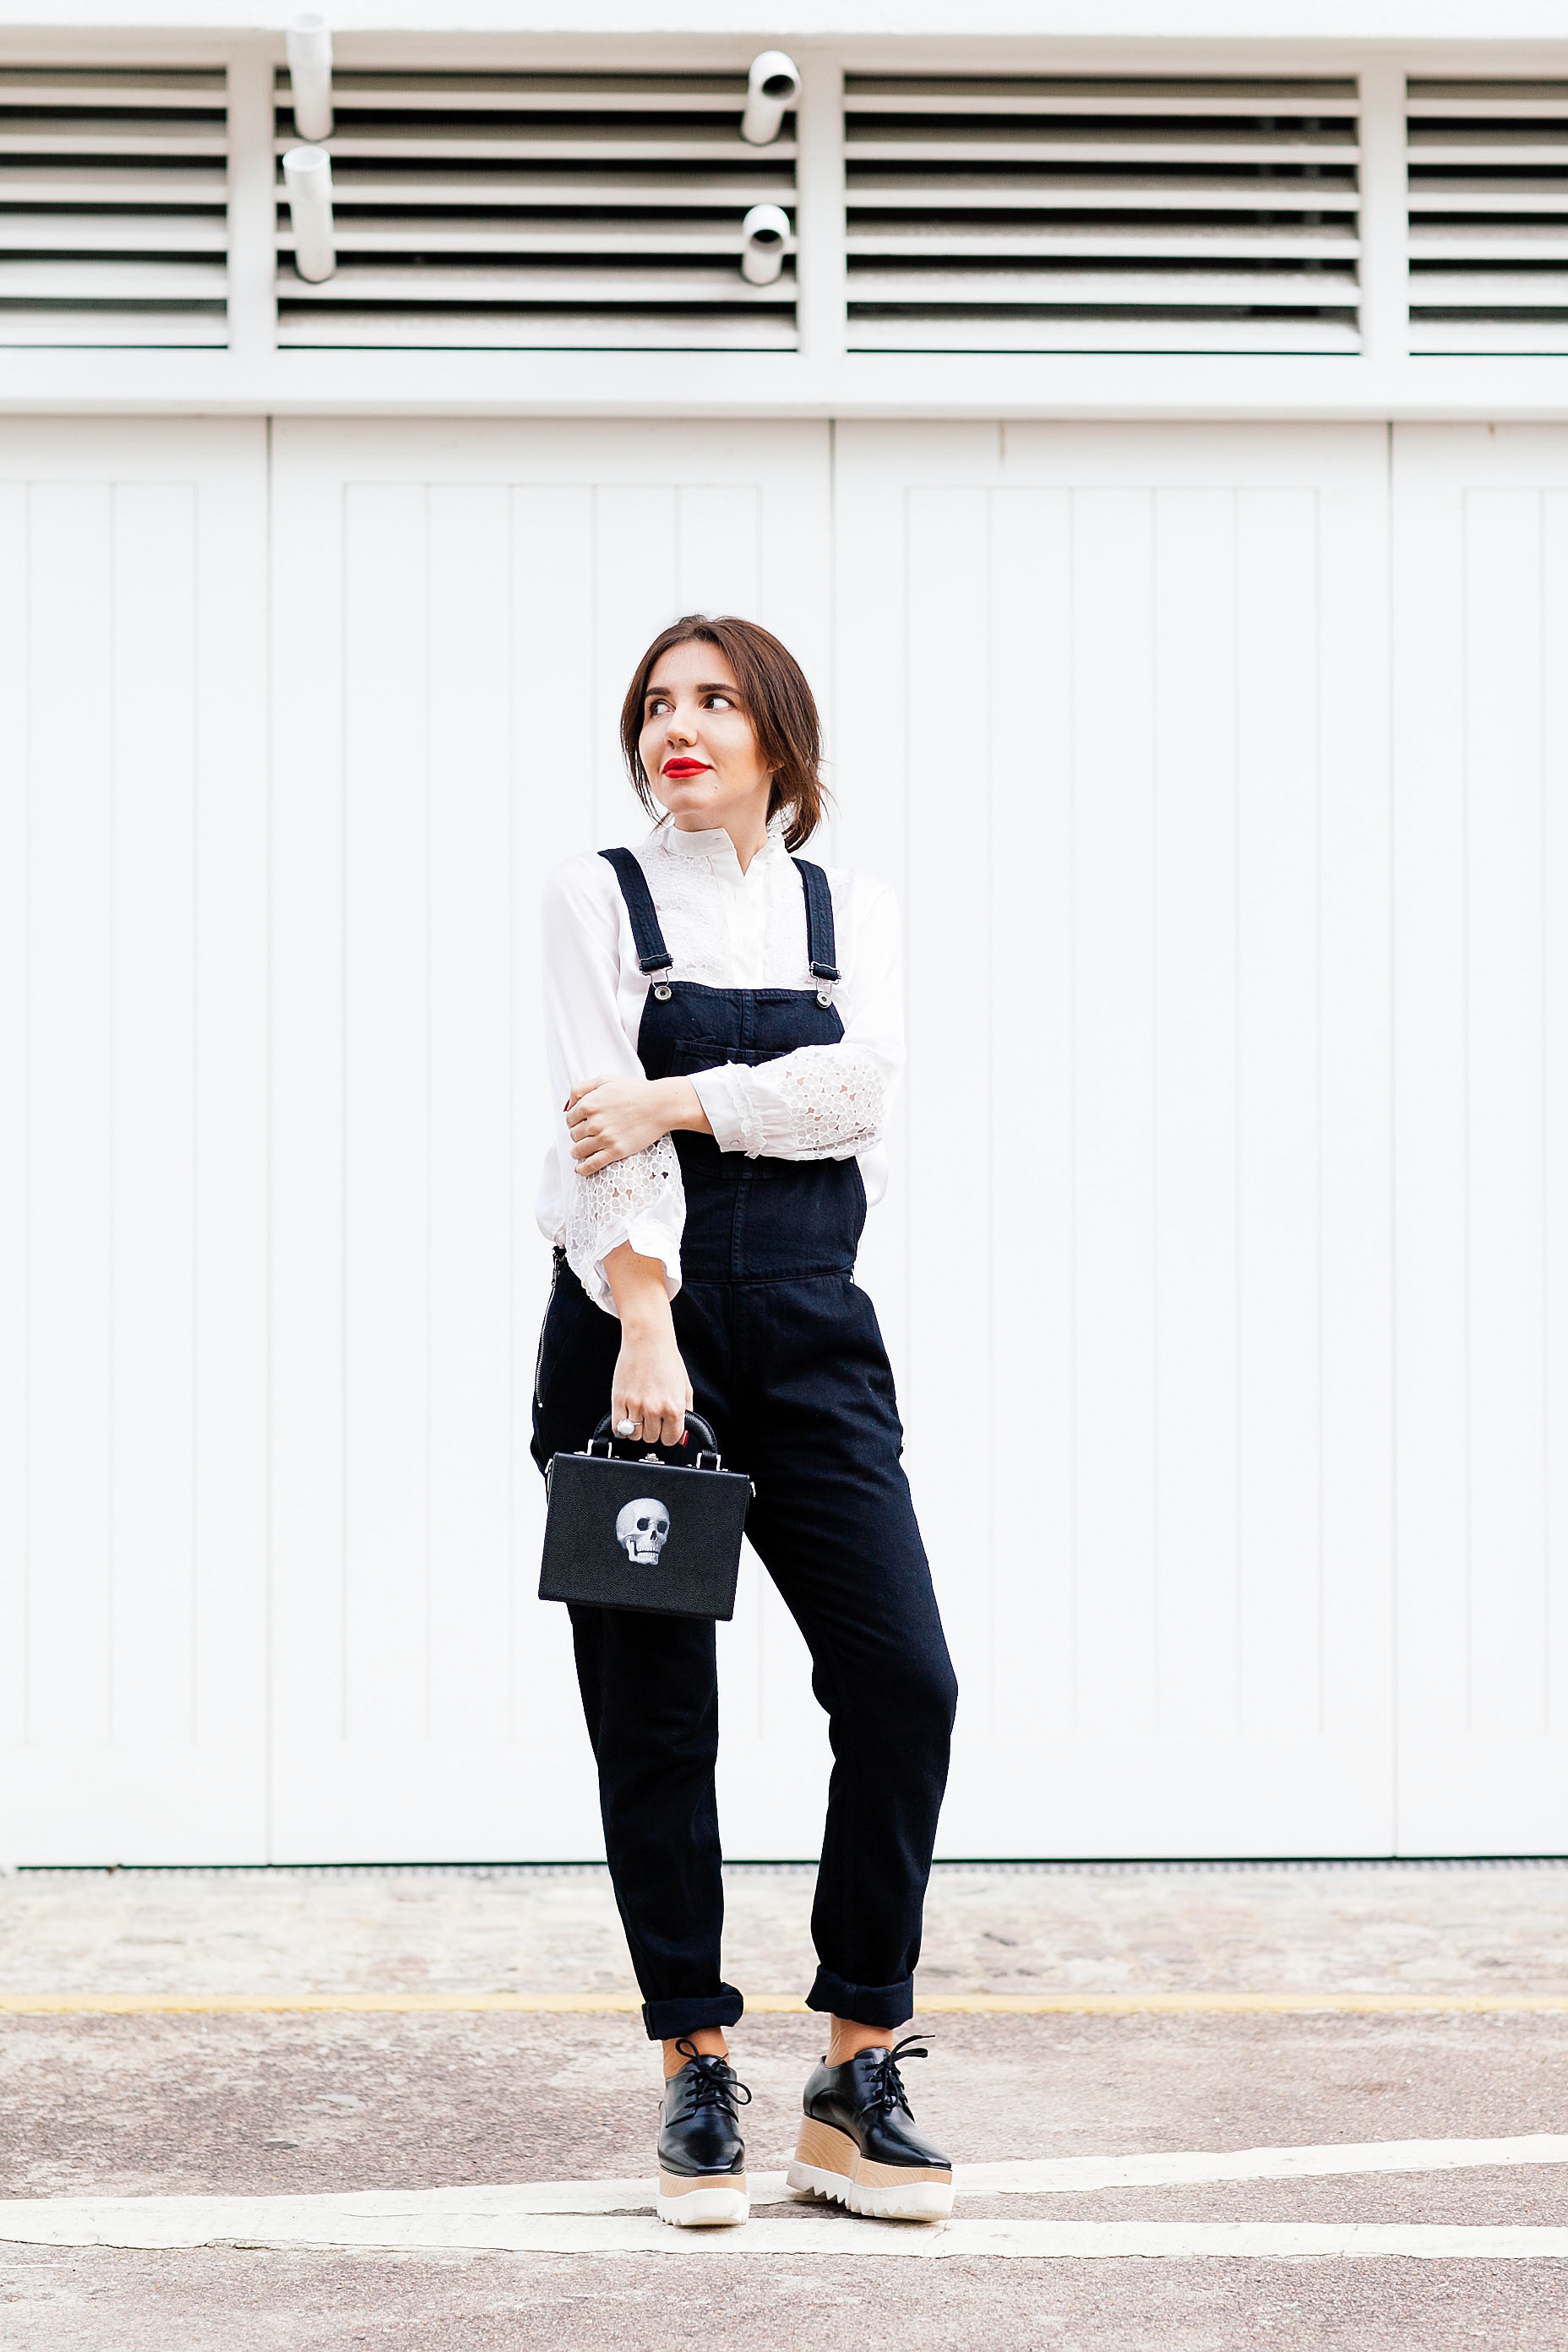 7 More Minutes. Fashion, travel and lifestyle blog by Alyona Gasimova. 5 Rules That Will Elevate Your Work Look. Overalls. www.7moreminutes.com